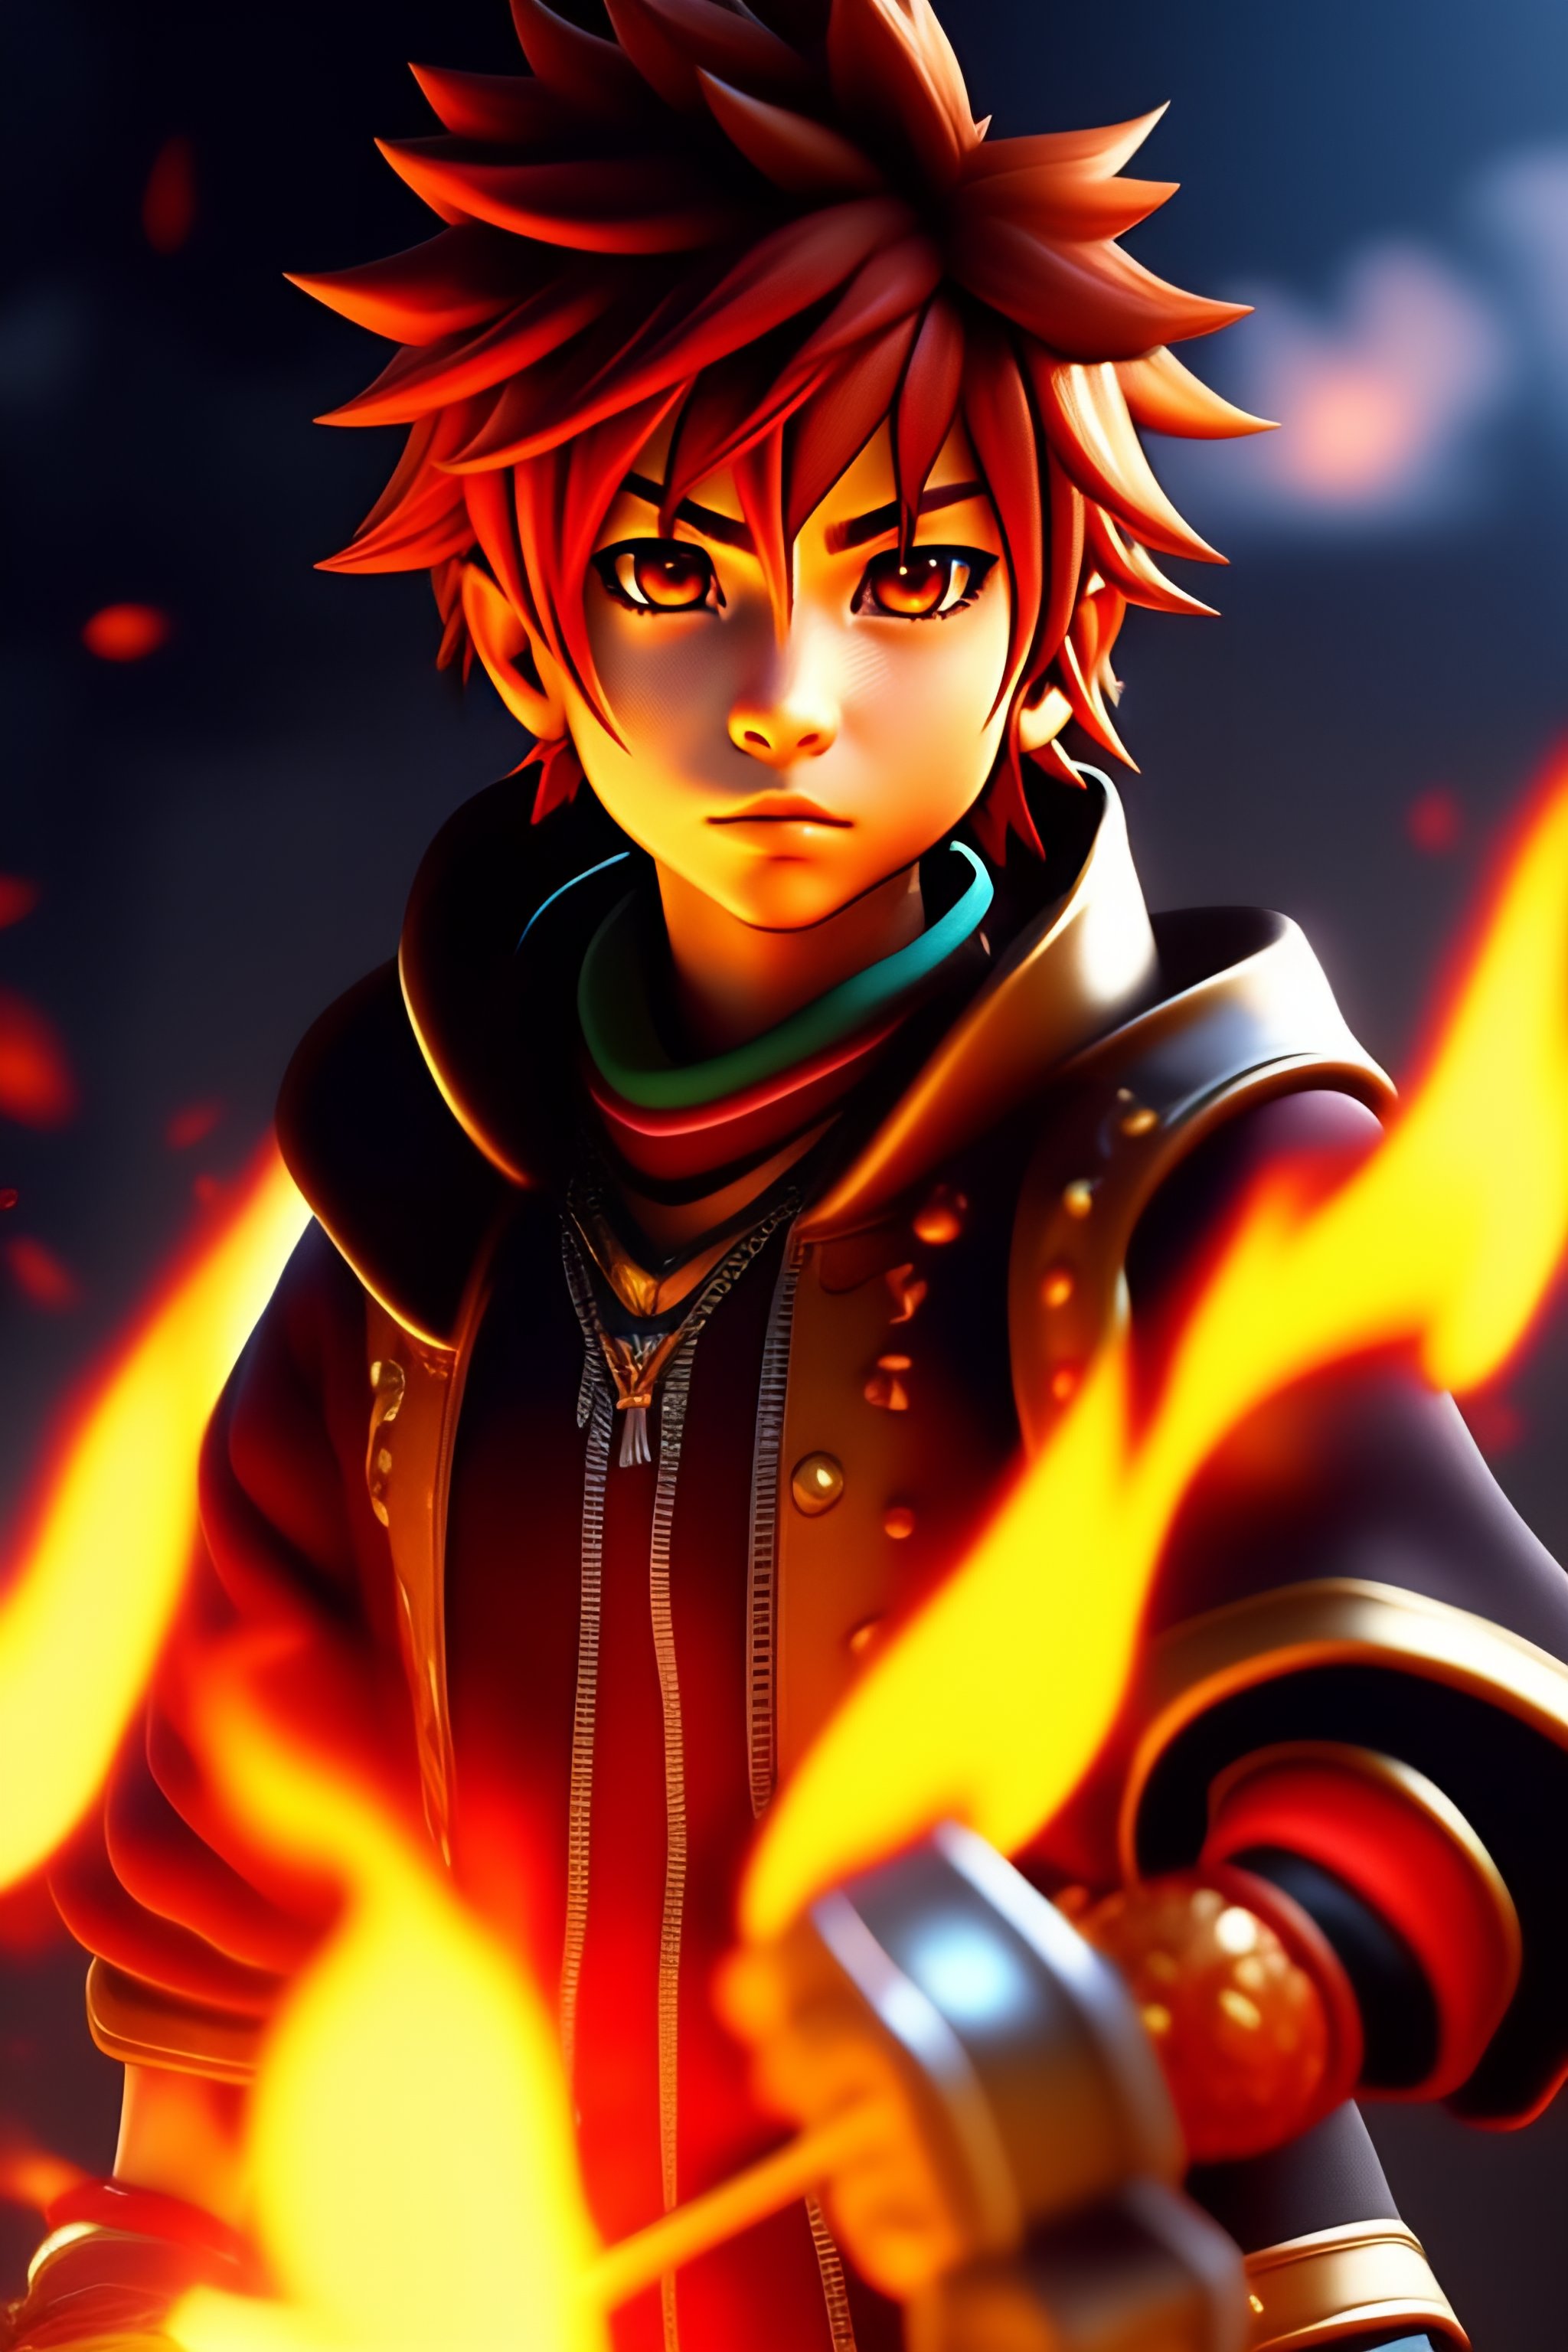 Lexica - Sora from kingdom hearts fighting with fire